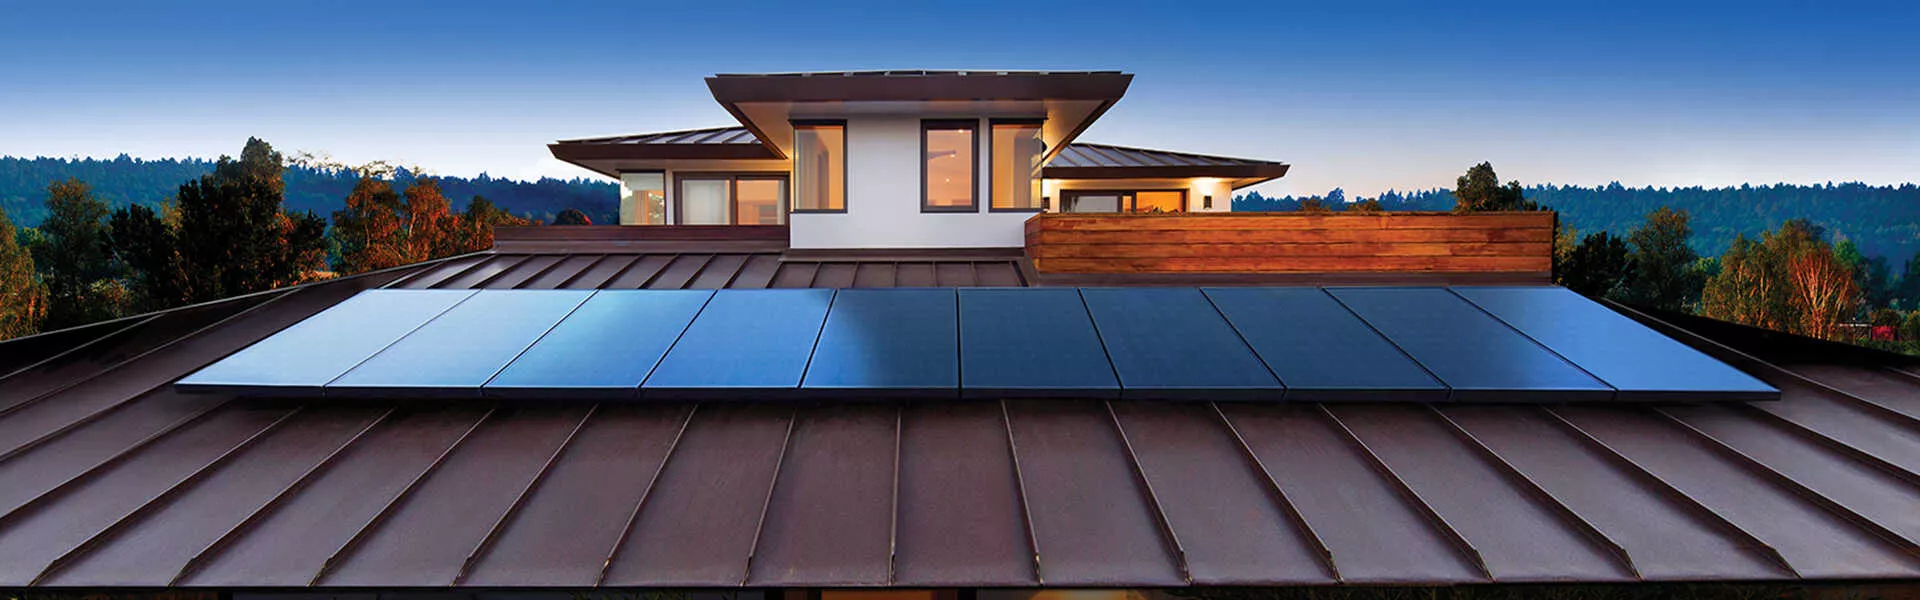 residential home with sunpower solar panels and blue sky